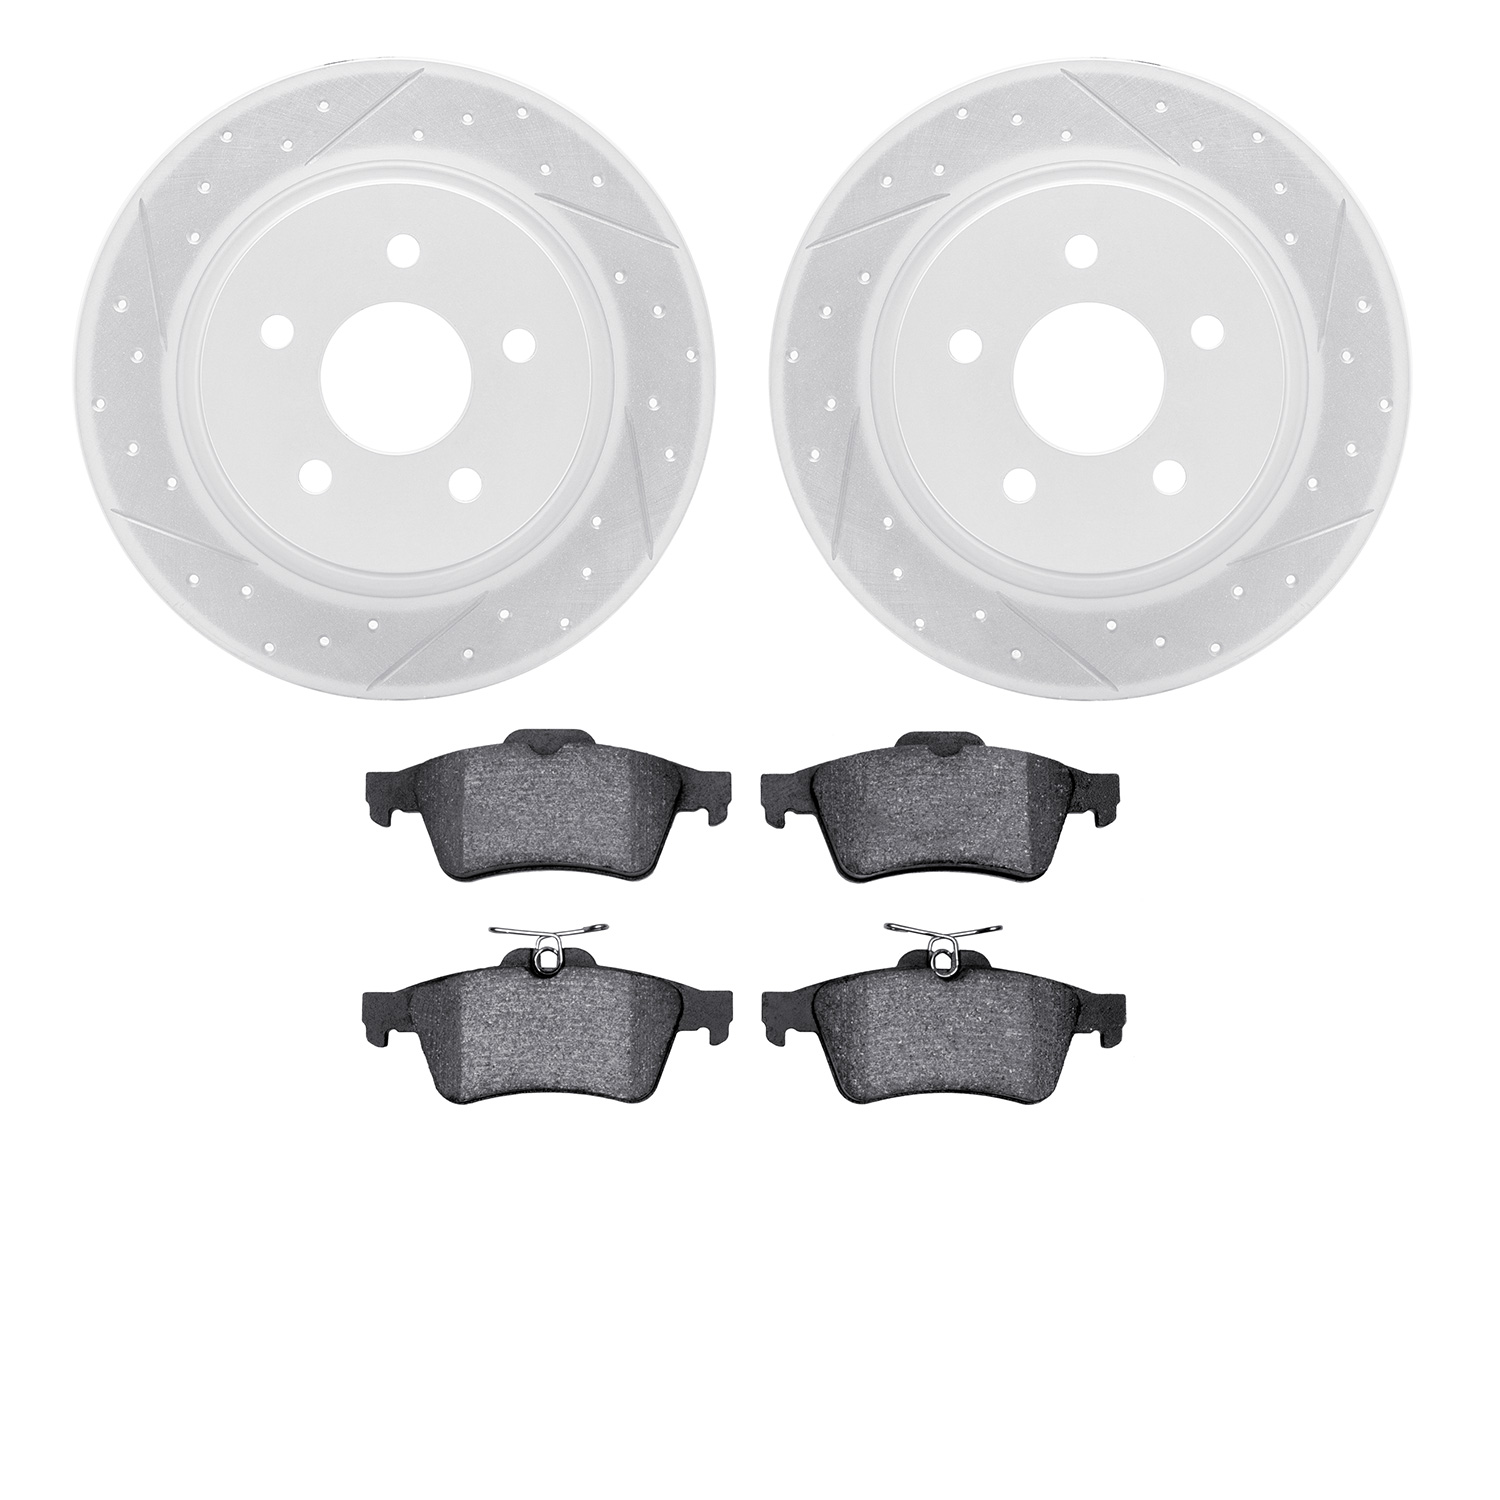 2502-54091 Geoperformance Drilled/Slotted Rotors w/5000 Advanced Brake Pads Kit, 2013-2018 Ford/Lincoln/Mercury/Mazda, Position: